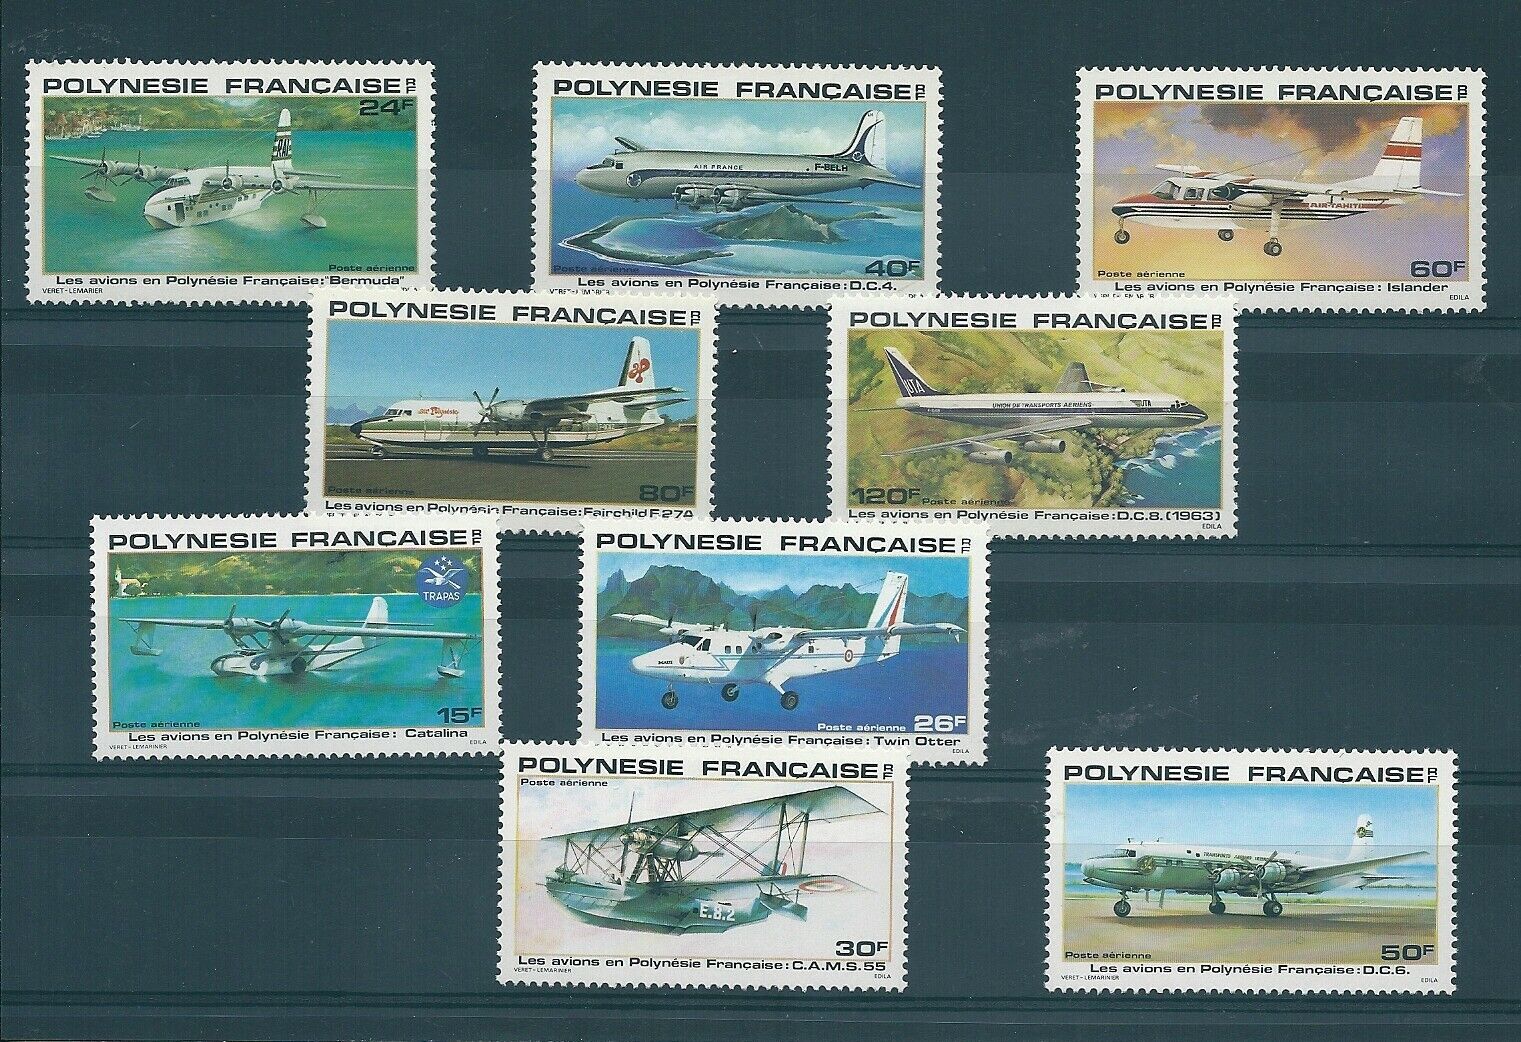 French Polynesia 1979-80 Planes 9 online shop MNH MF11946 Val famous